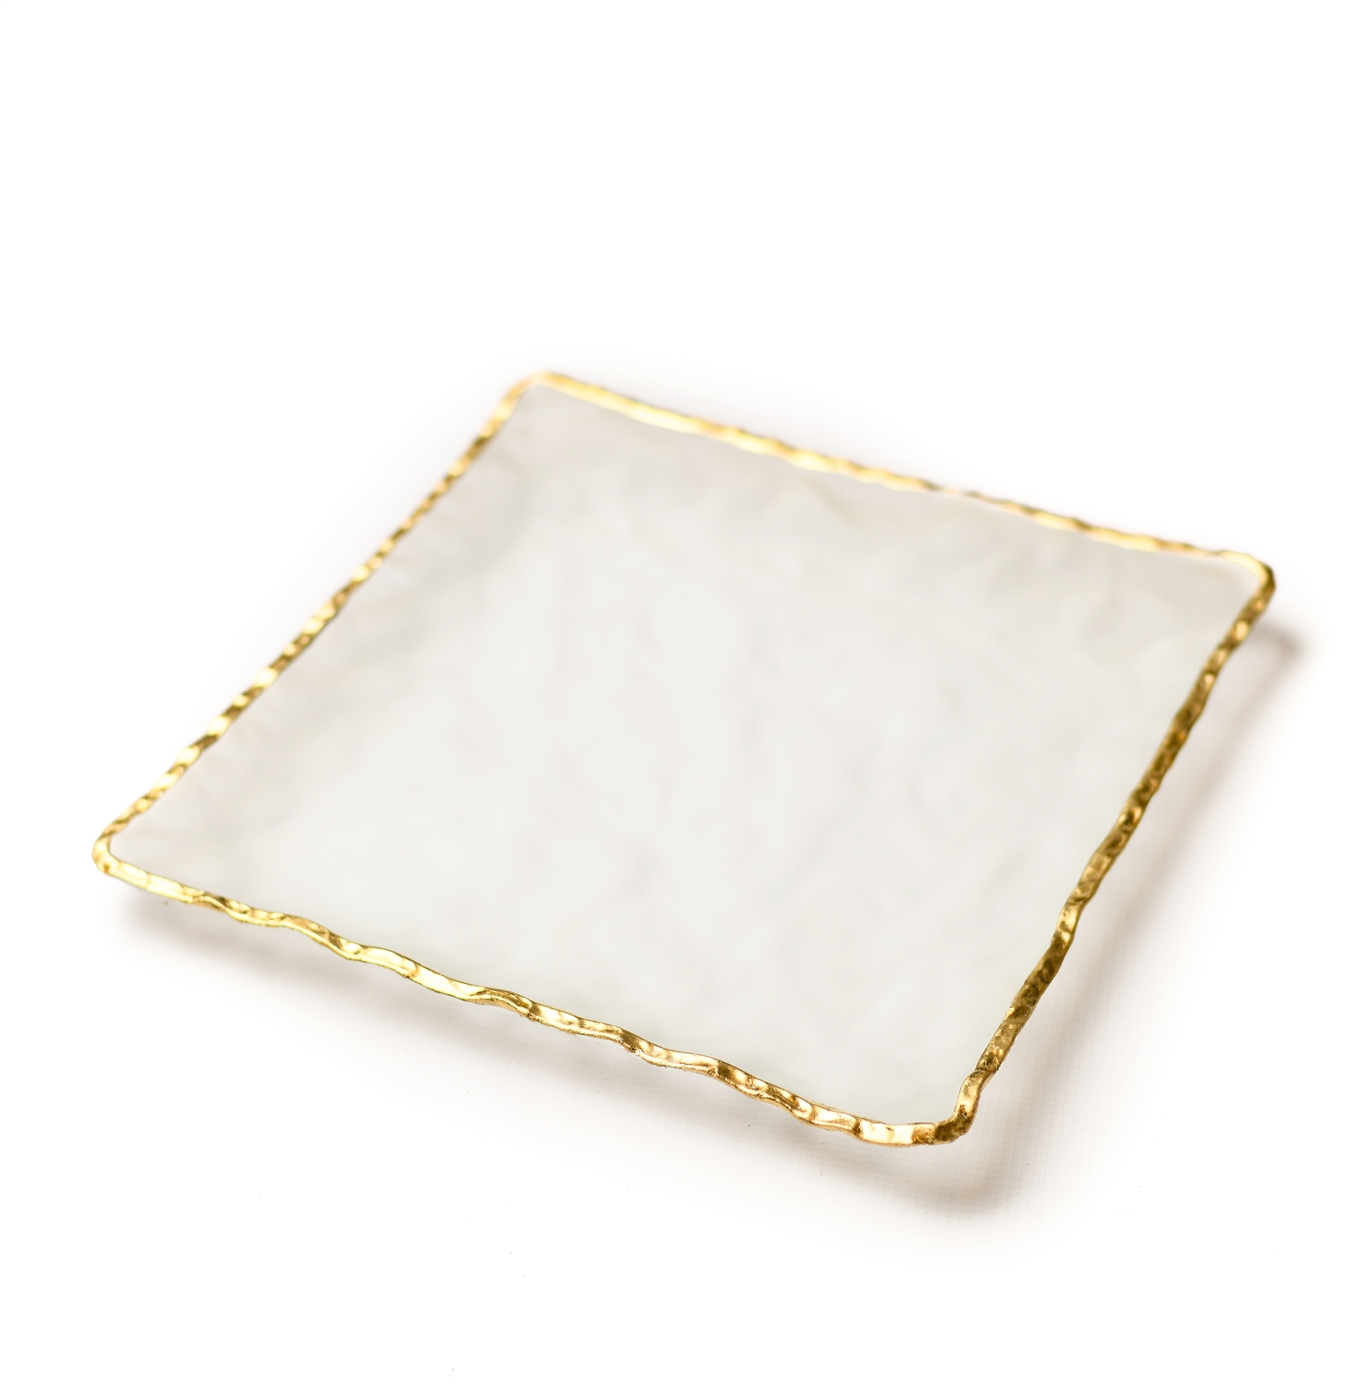 Square Glass Tray in Frosted White Color with Gold Rim